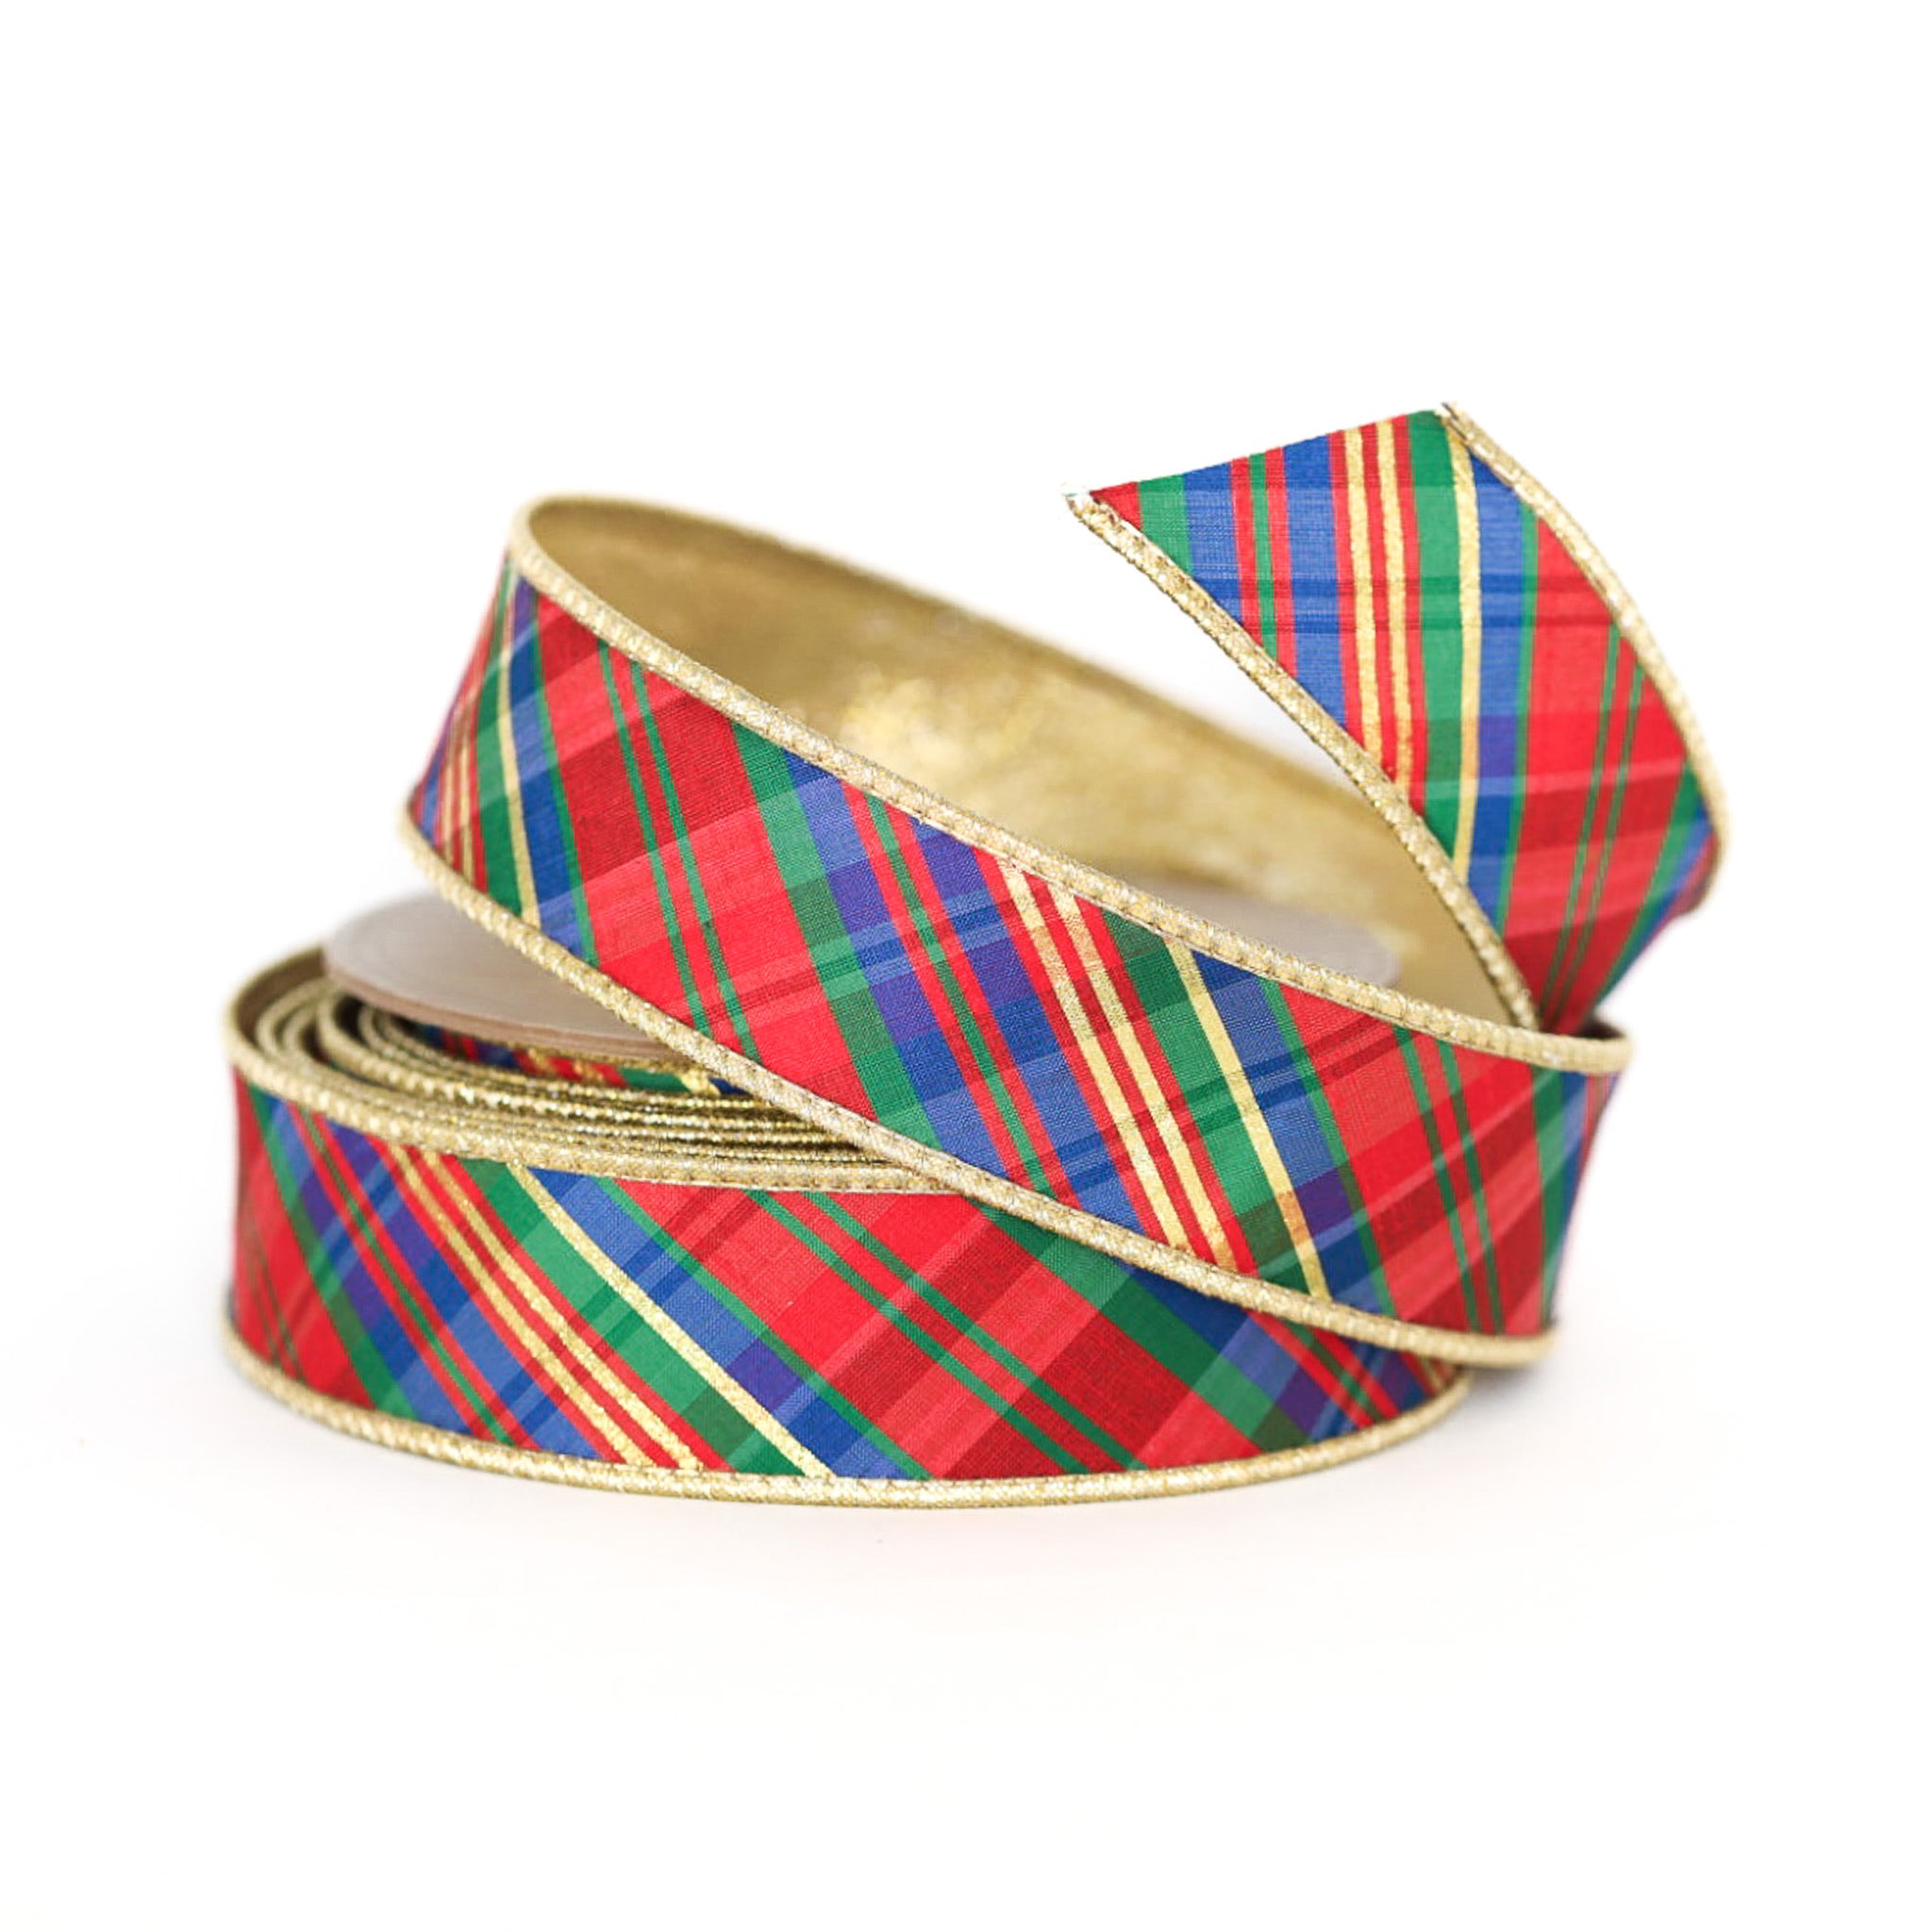 Yuletide Plaid Ribbon - Available in Two Sizes